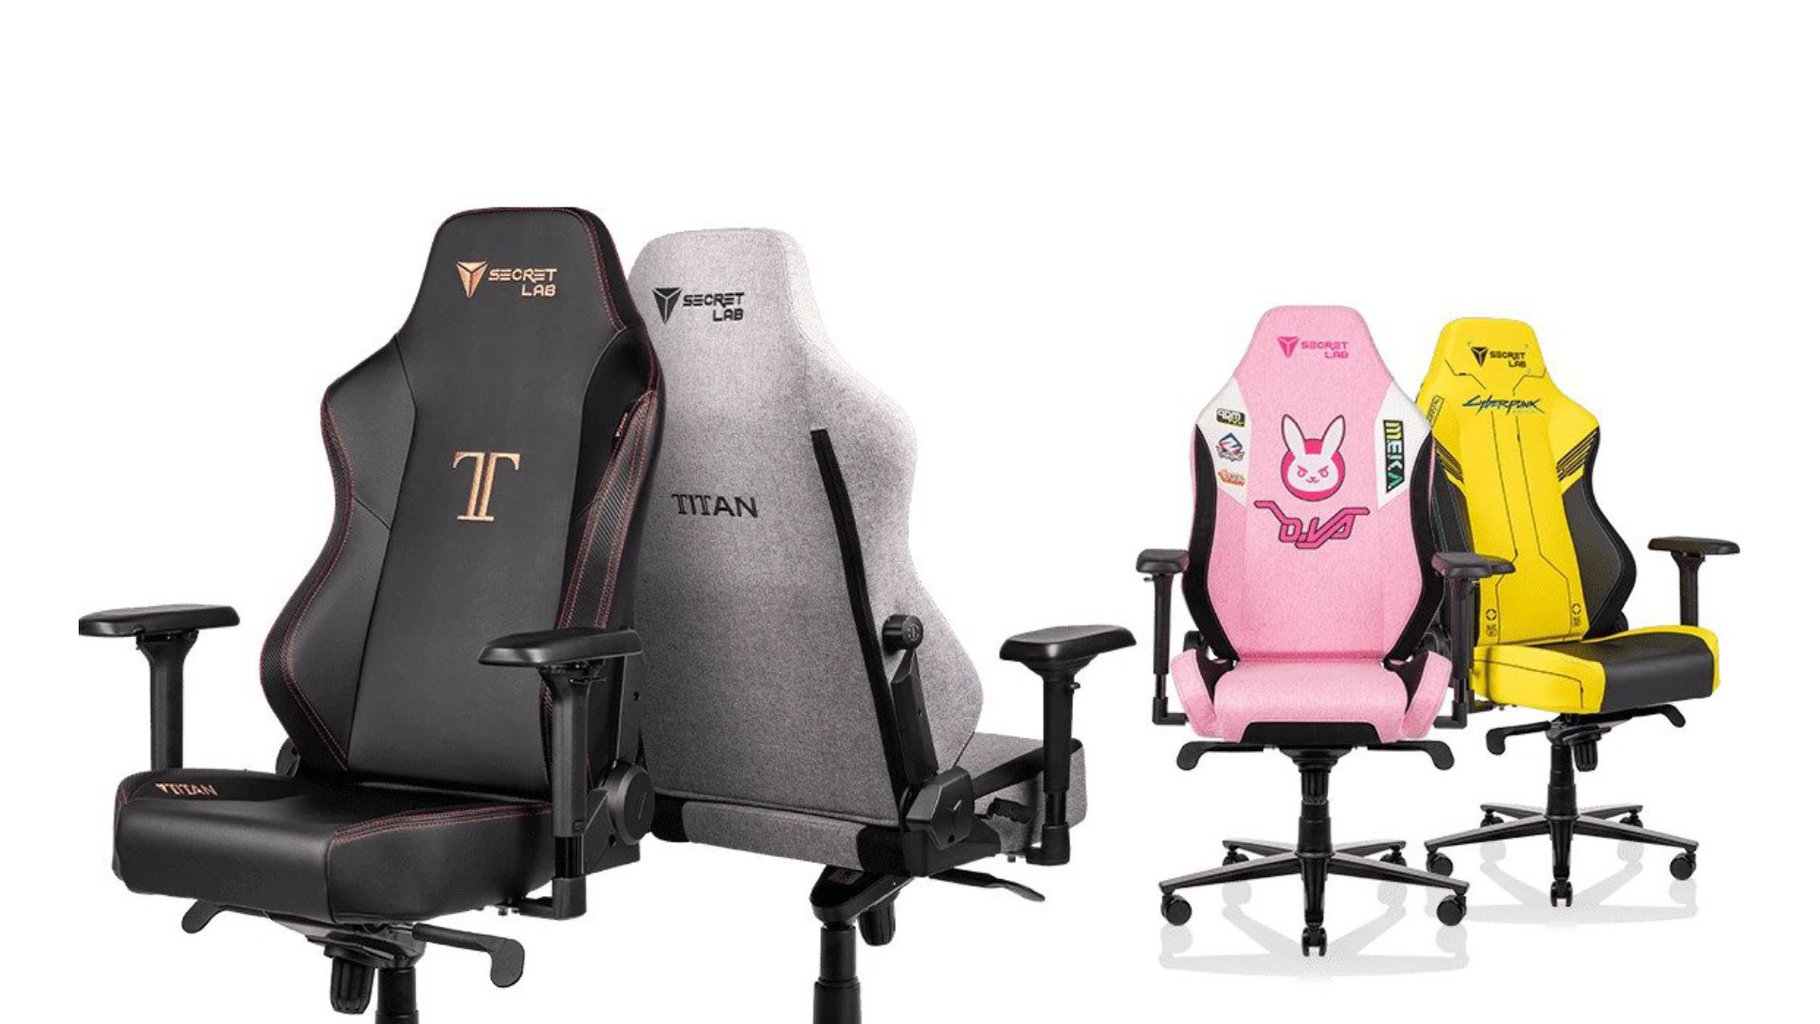 SecretLab Chairs for Gamers